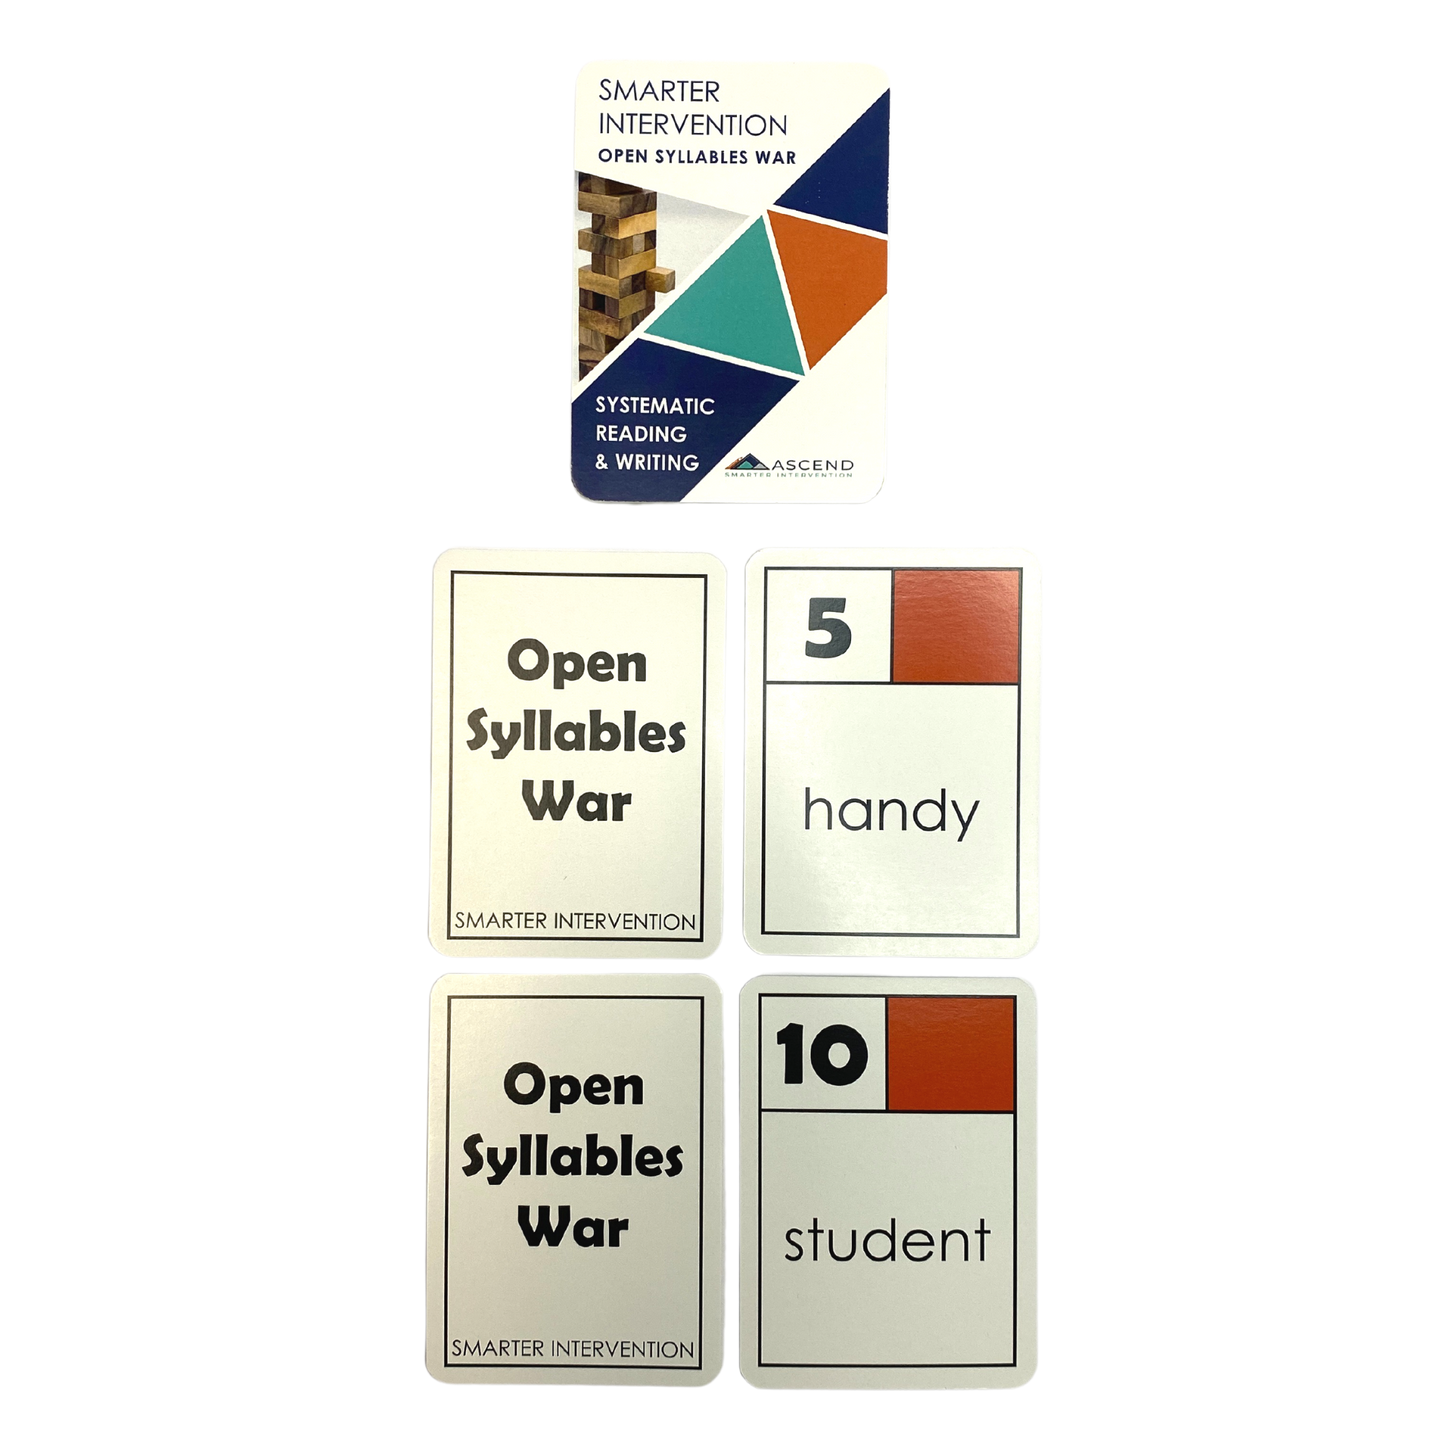 Use the Open Syllables War game cards as a review drill in small group interventions or as a literacy center activity. This game helps students strengthen their reading skills, build their vocabulary, and improve their comprehension in a fun and interactive way. It is designed to reinforce key concepts in a way that is engaging and memorable.